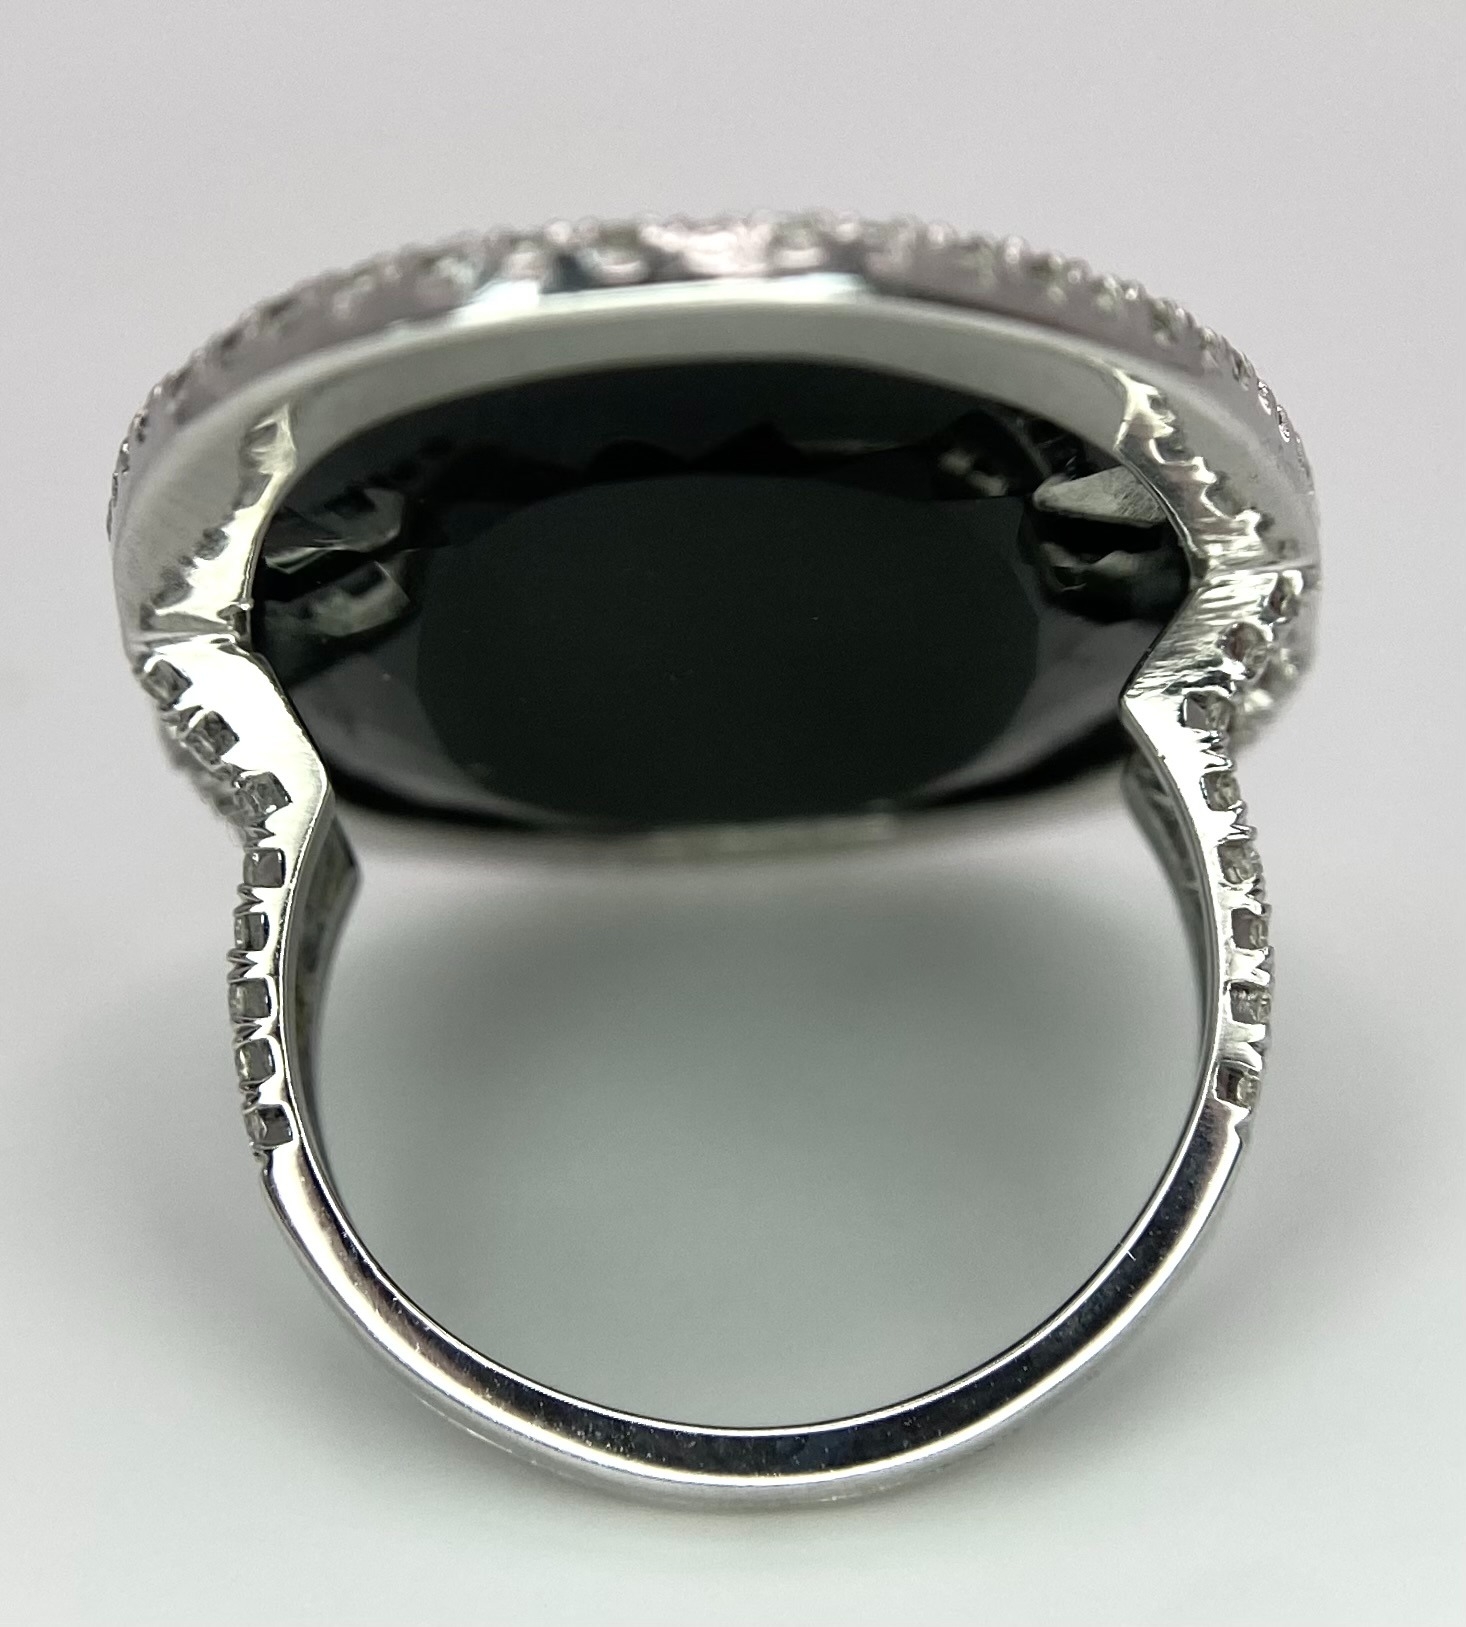 A Beautiful 18k White Gold Black Onyx and Diamond Ladies Dress Ring. Faceted black onyx with a - Image 5 of 8